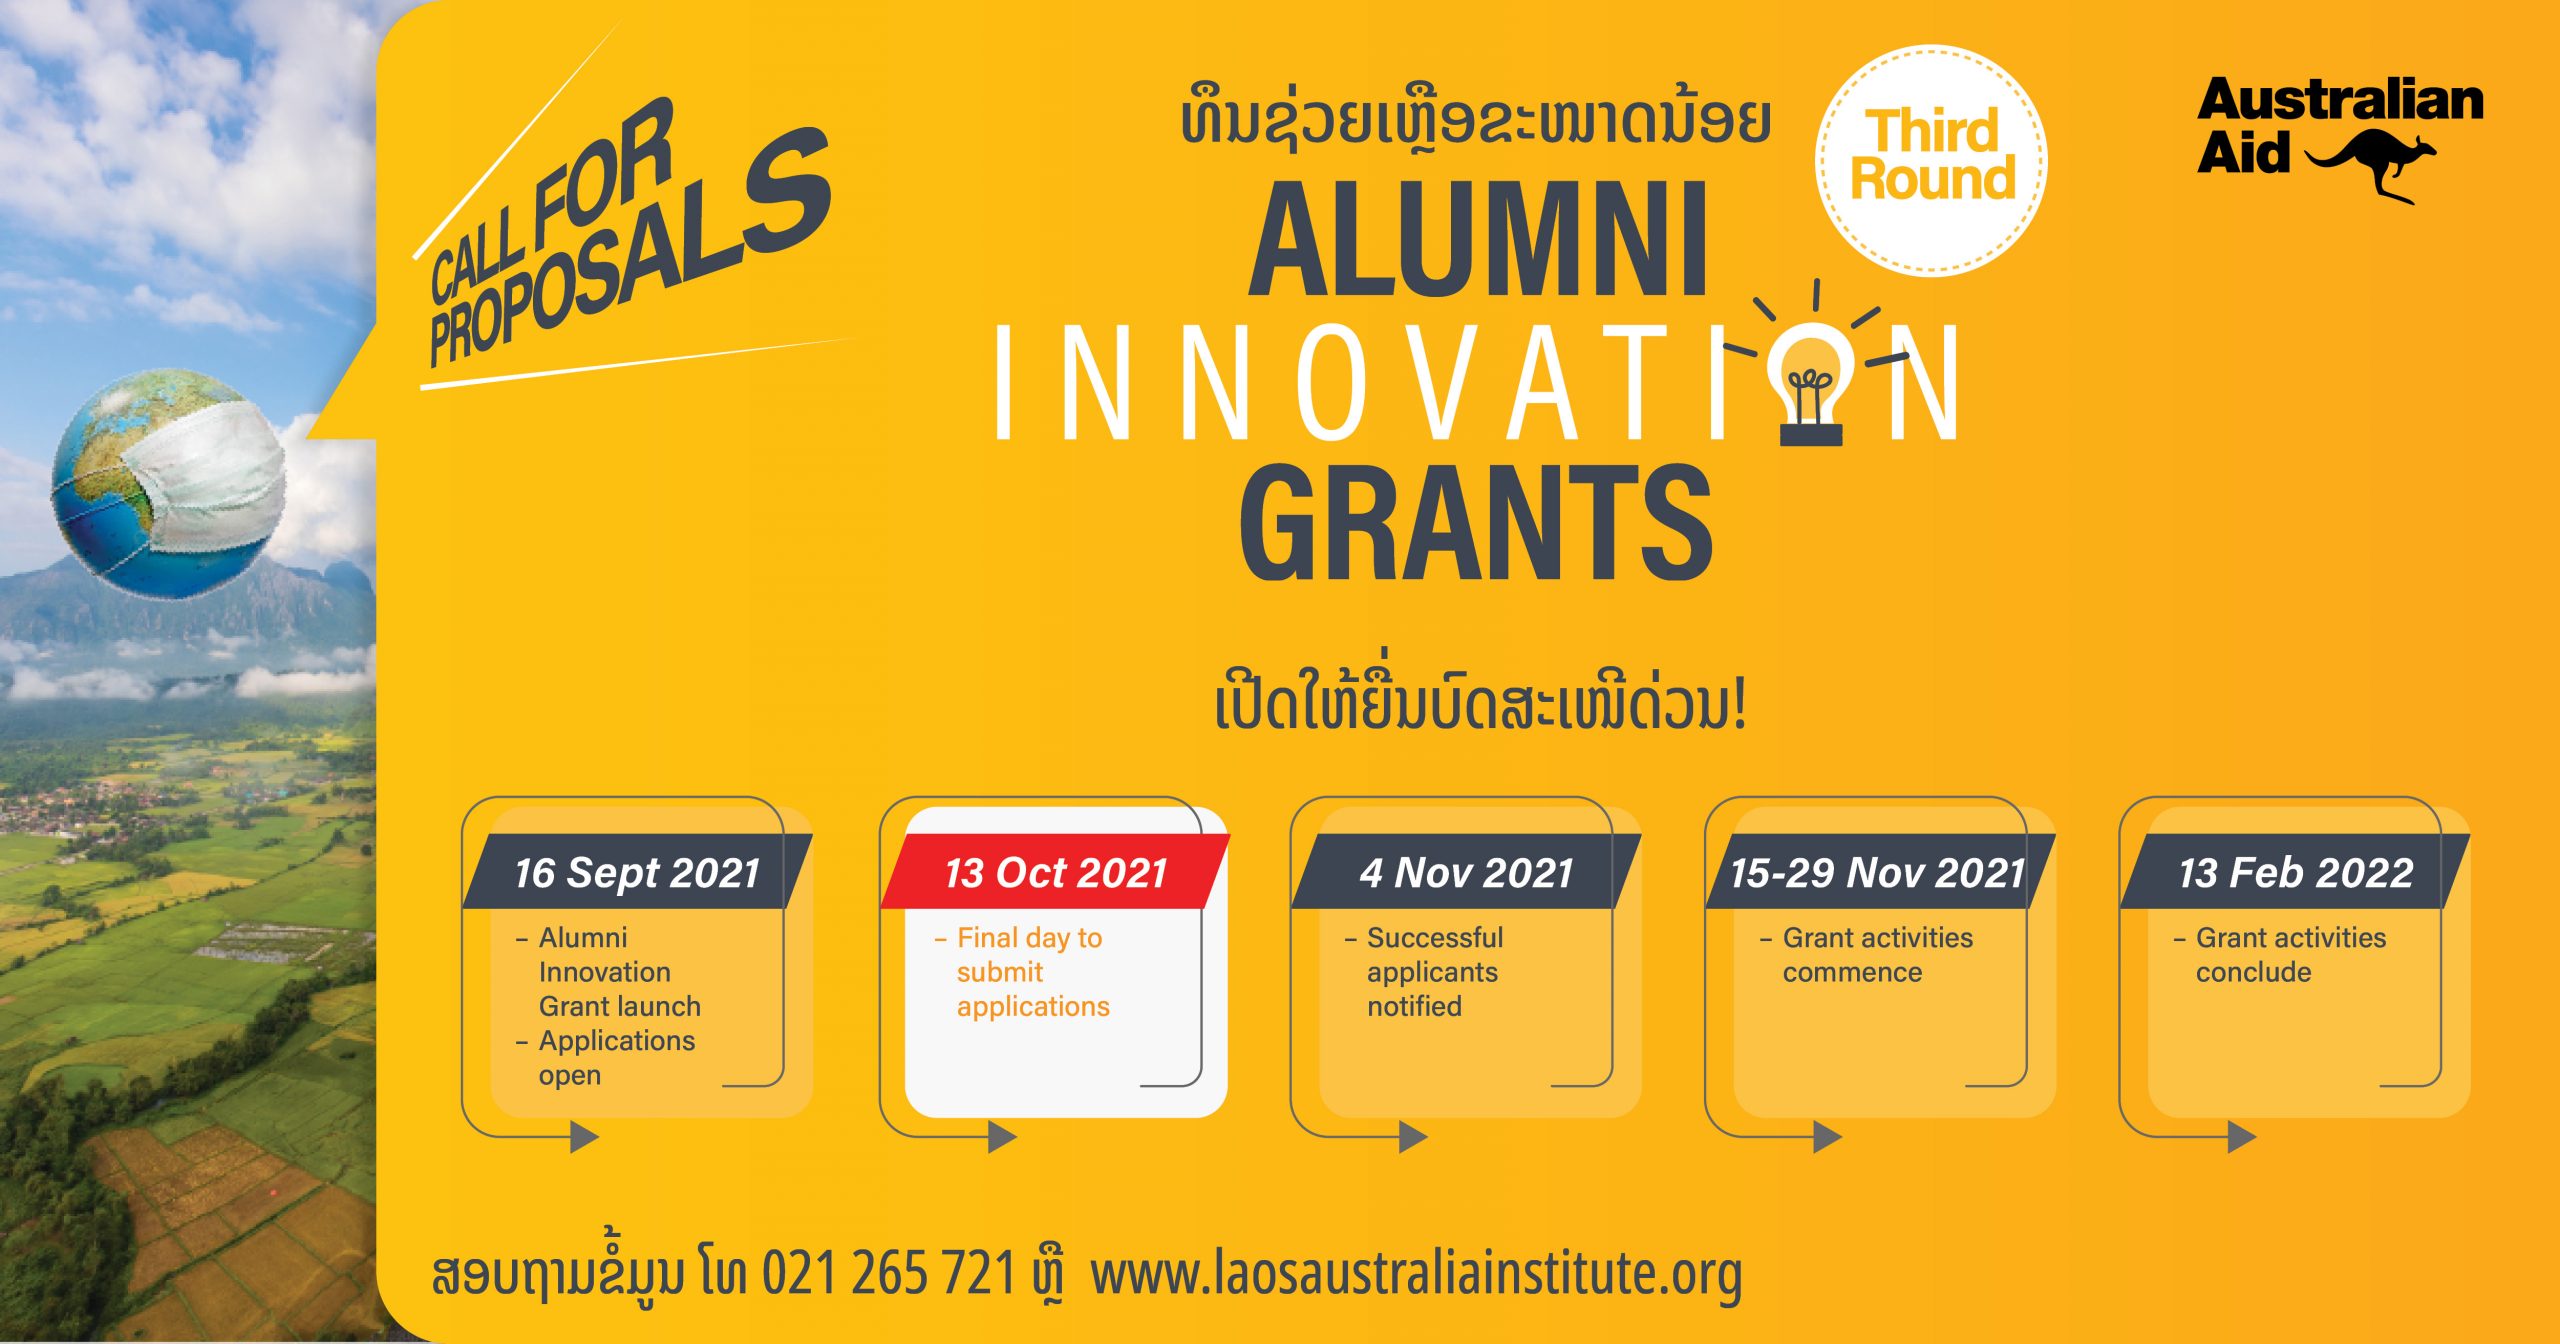 Applications are now open for round 3 of the Alumni Innovation Grants